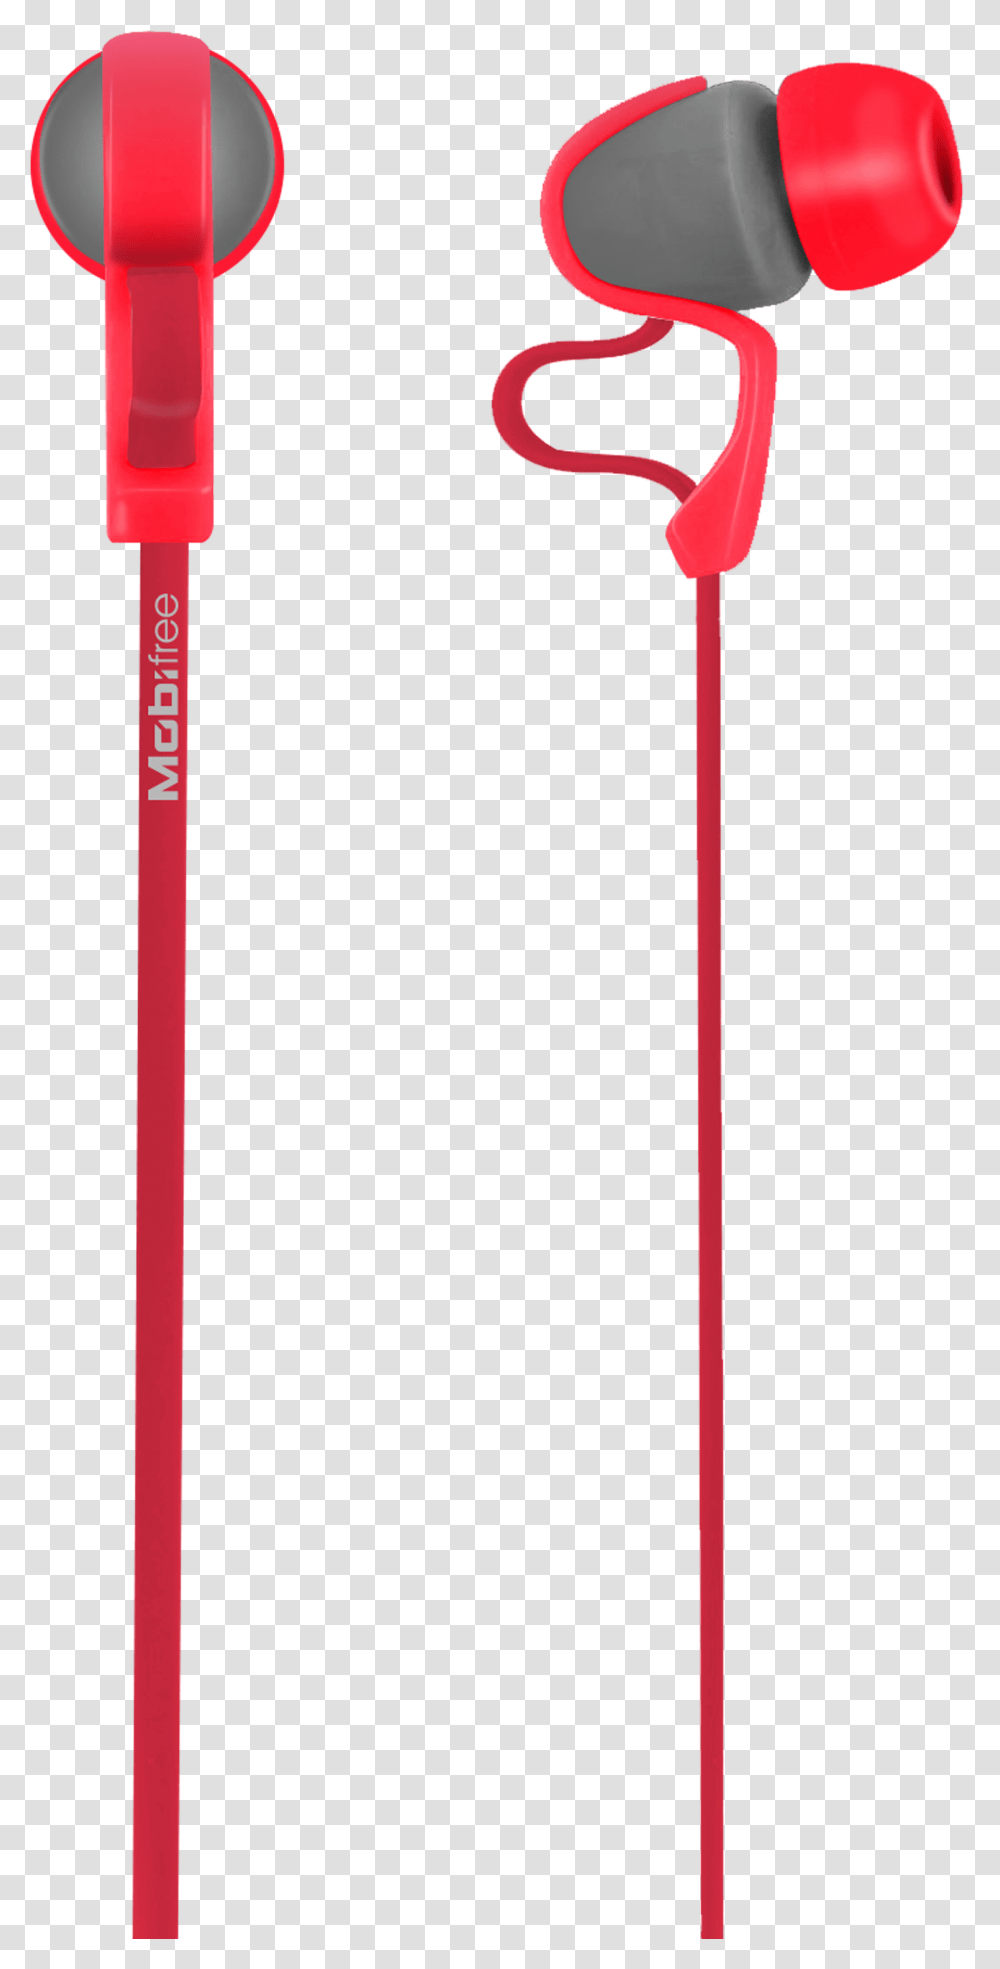 Audfonos In Ear Con Micrfono Coleccin Urban Kaos Headphones, Weapon, Weaponry, Stick, Oars Transparent Png